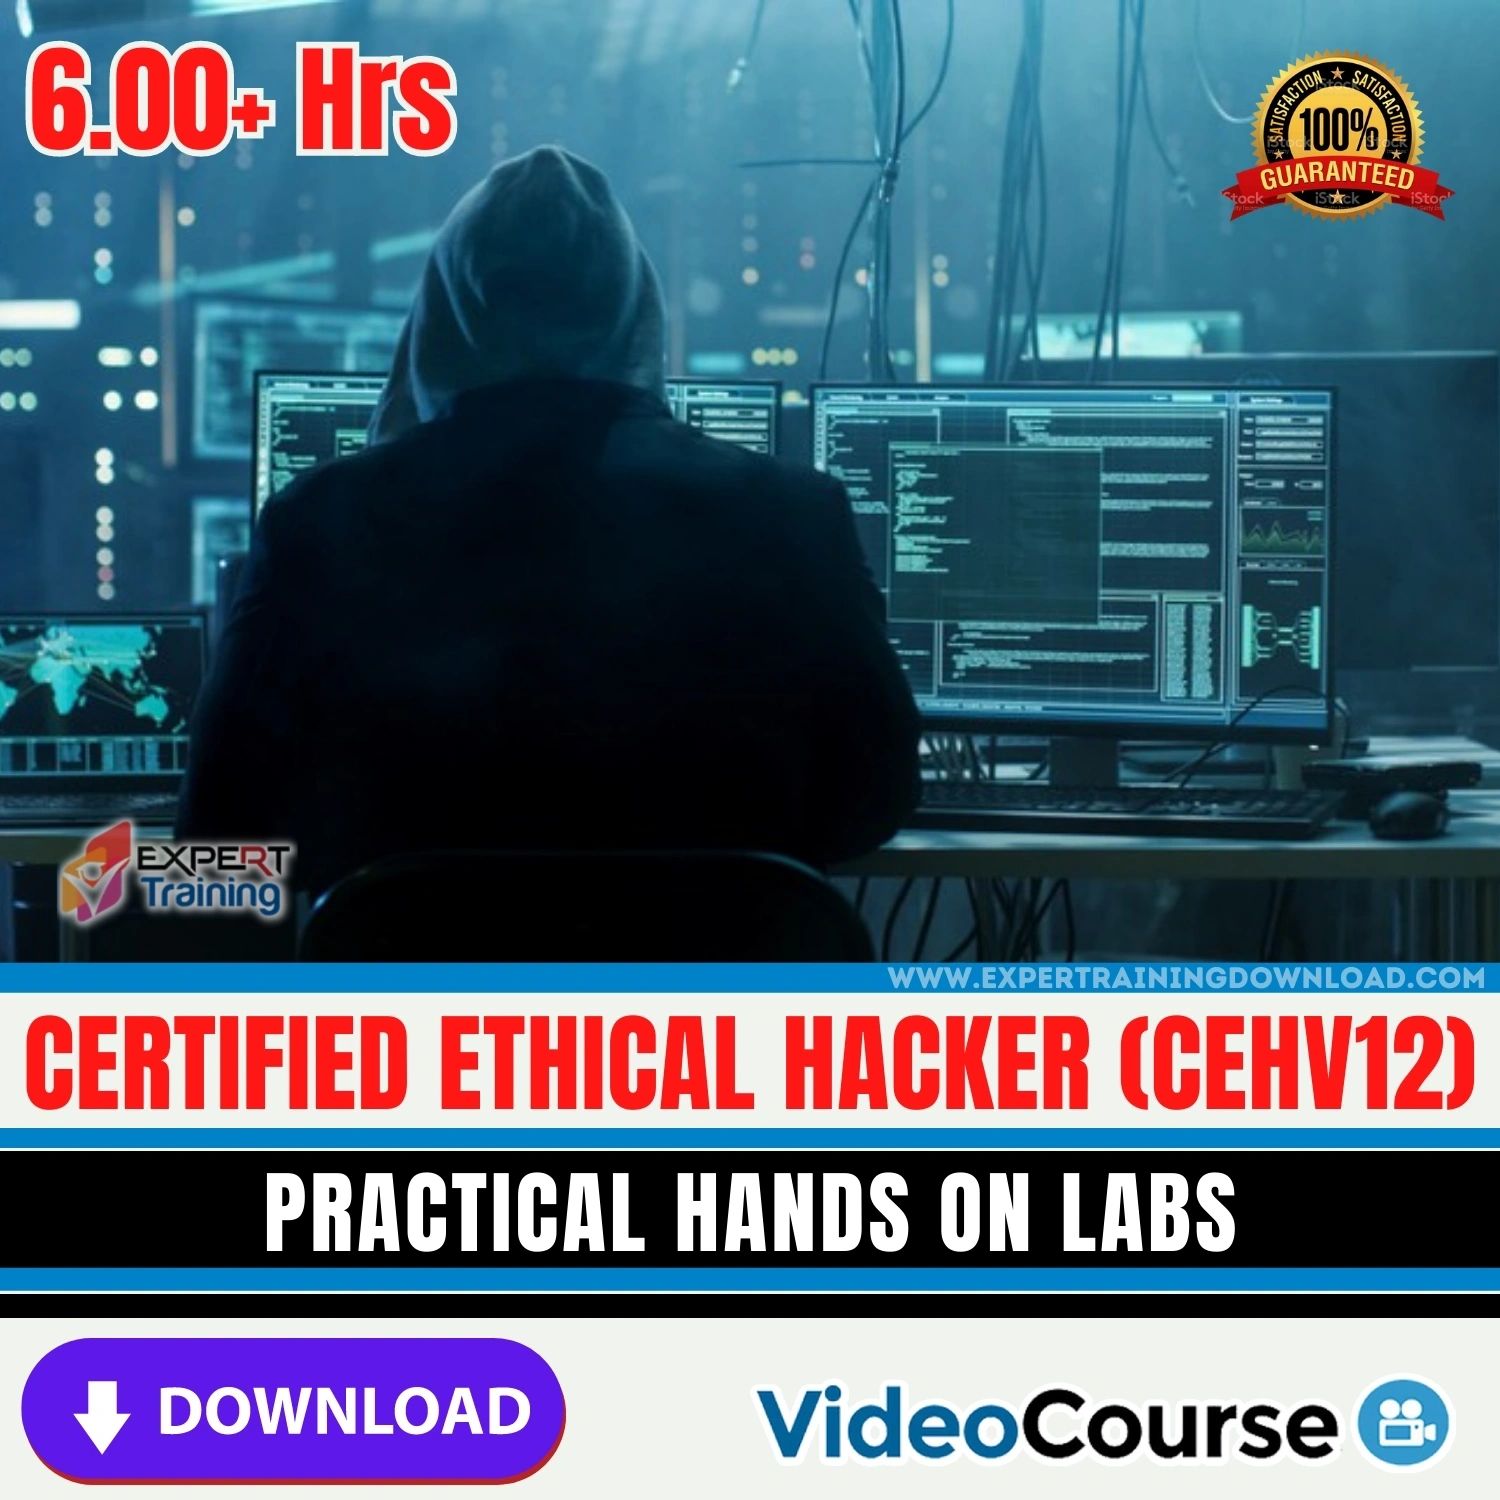 Certified Ethical Hacker (CEHv12) Practical hands on Labs